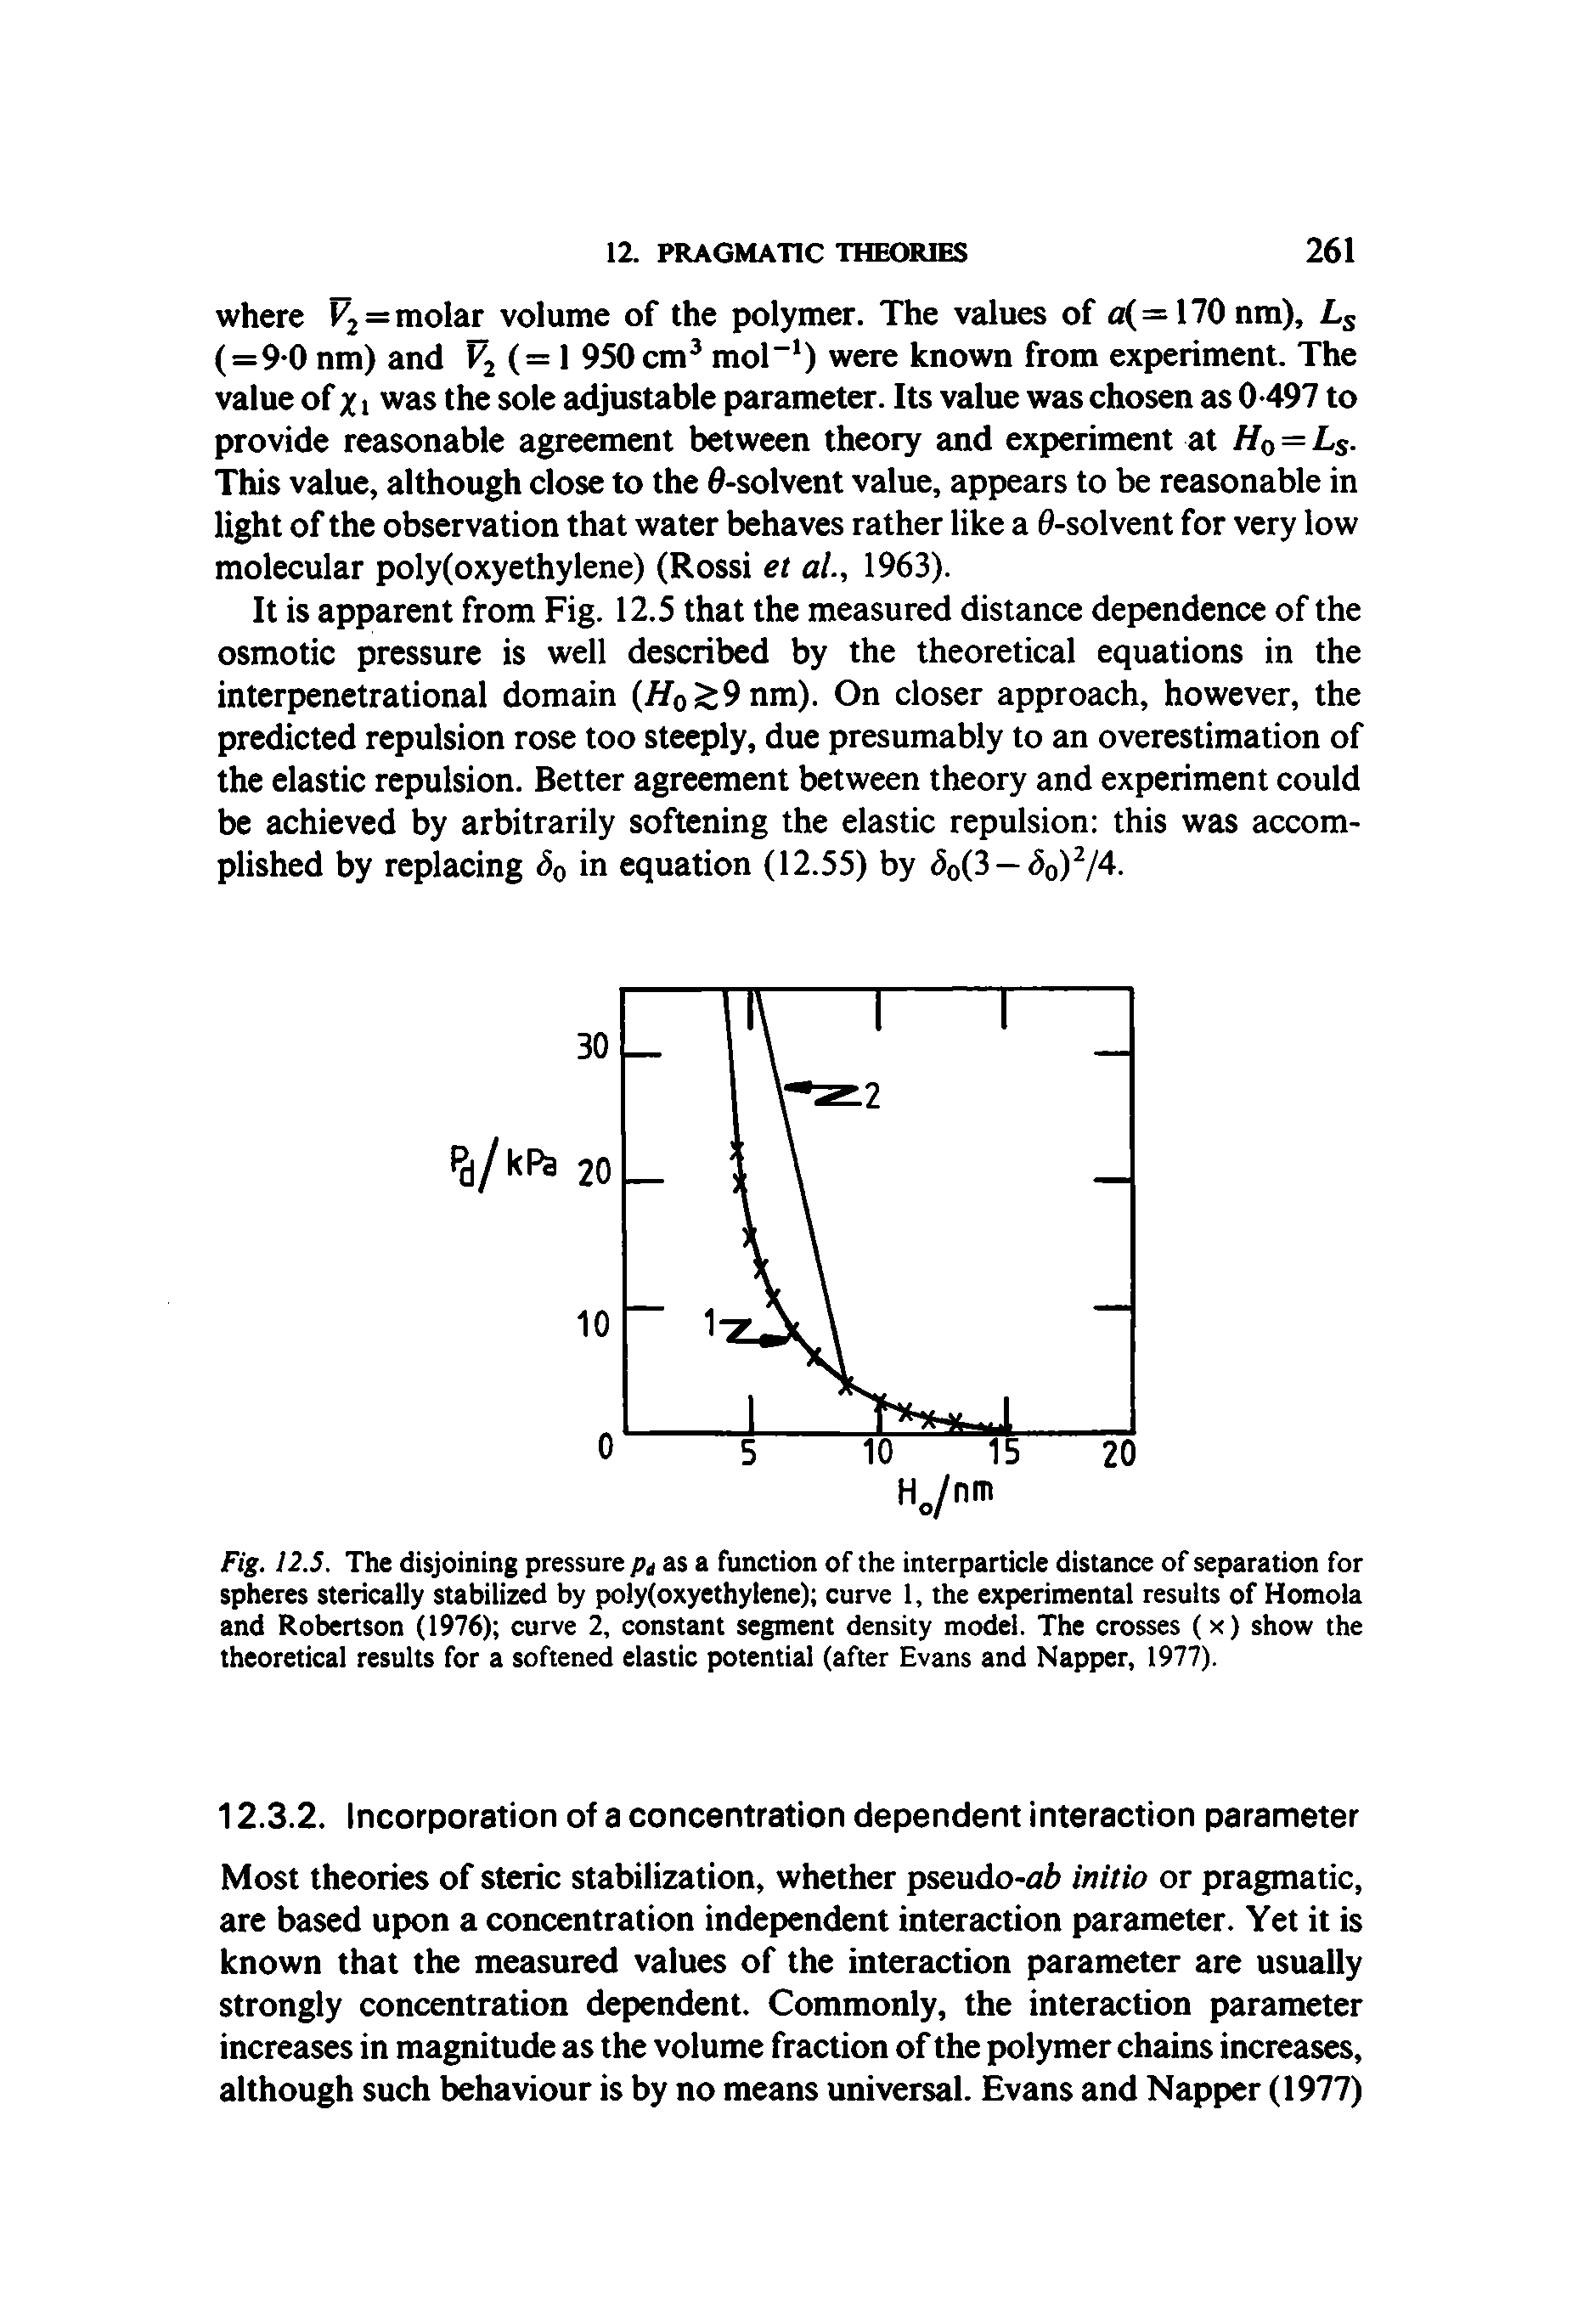 Fig. 12.5. The disjoining pressure as a function of the interparticle distance of separation for spheres sterically stabilized by poly(oxyethylene) curve 1, the experimental results of Homola and Robertson (1976) curve 2, constant segment density model. The crosses (x) show the theoretical results for a softened elastic potential (after Evans and Napper, 1977).